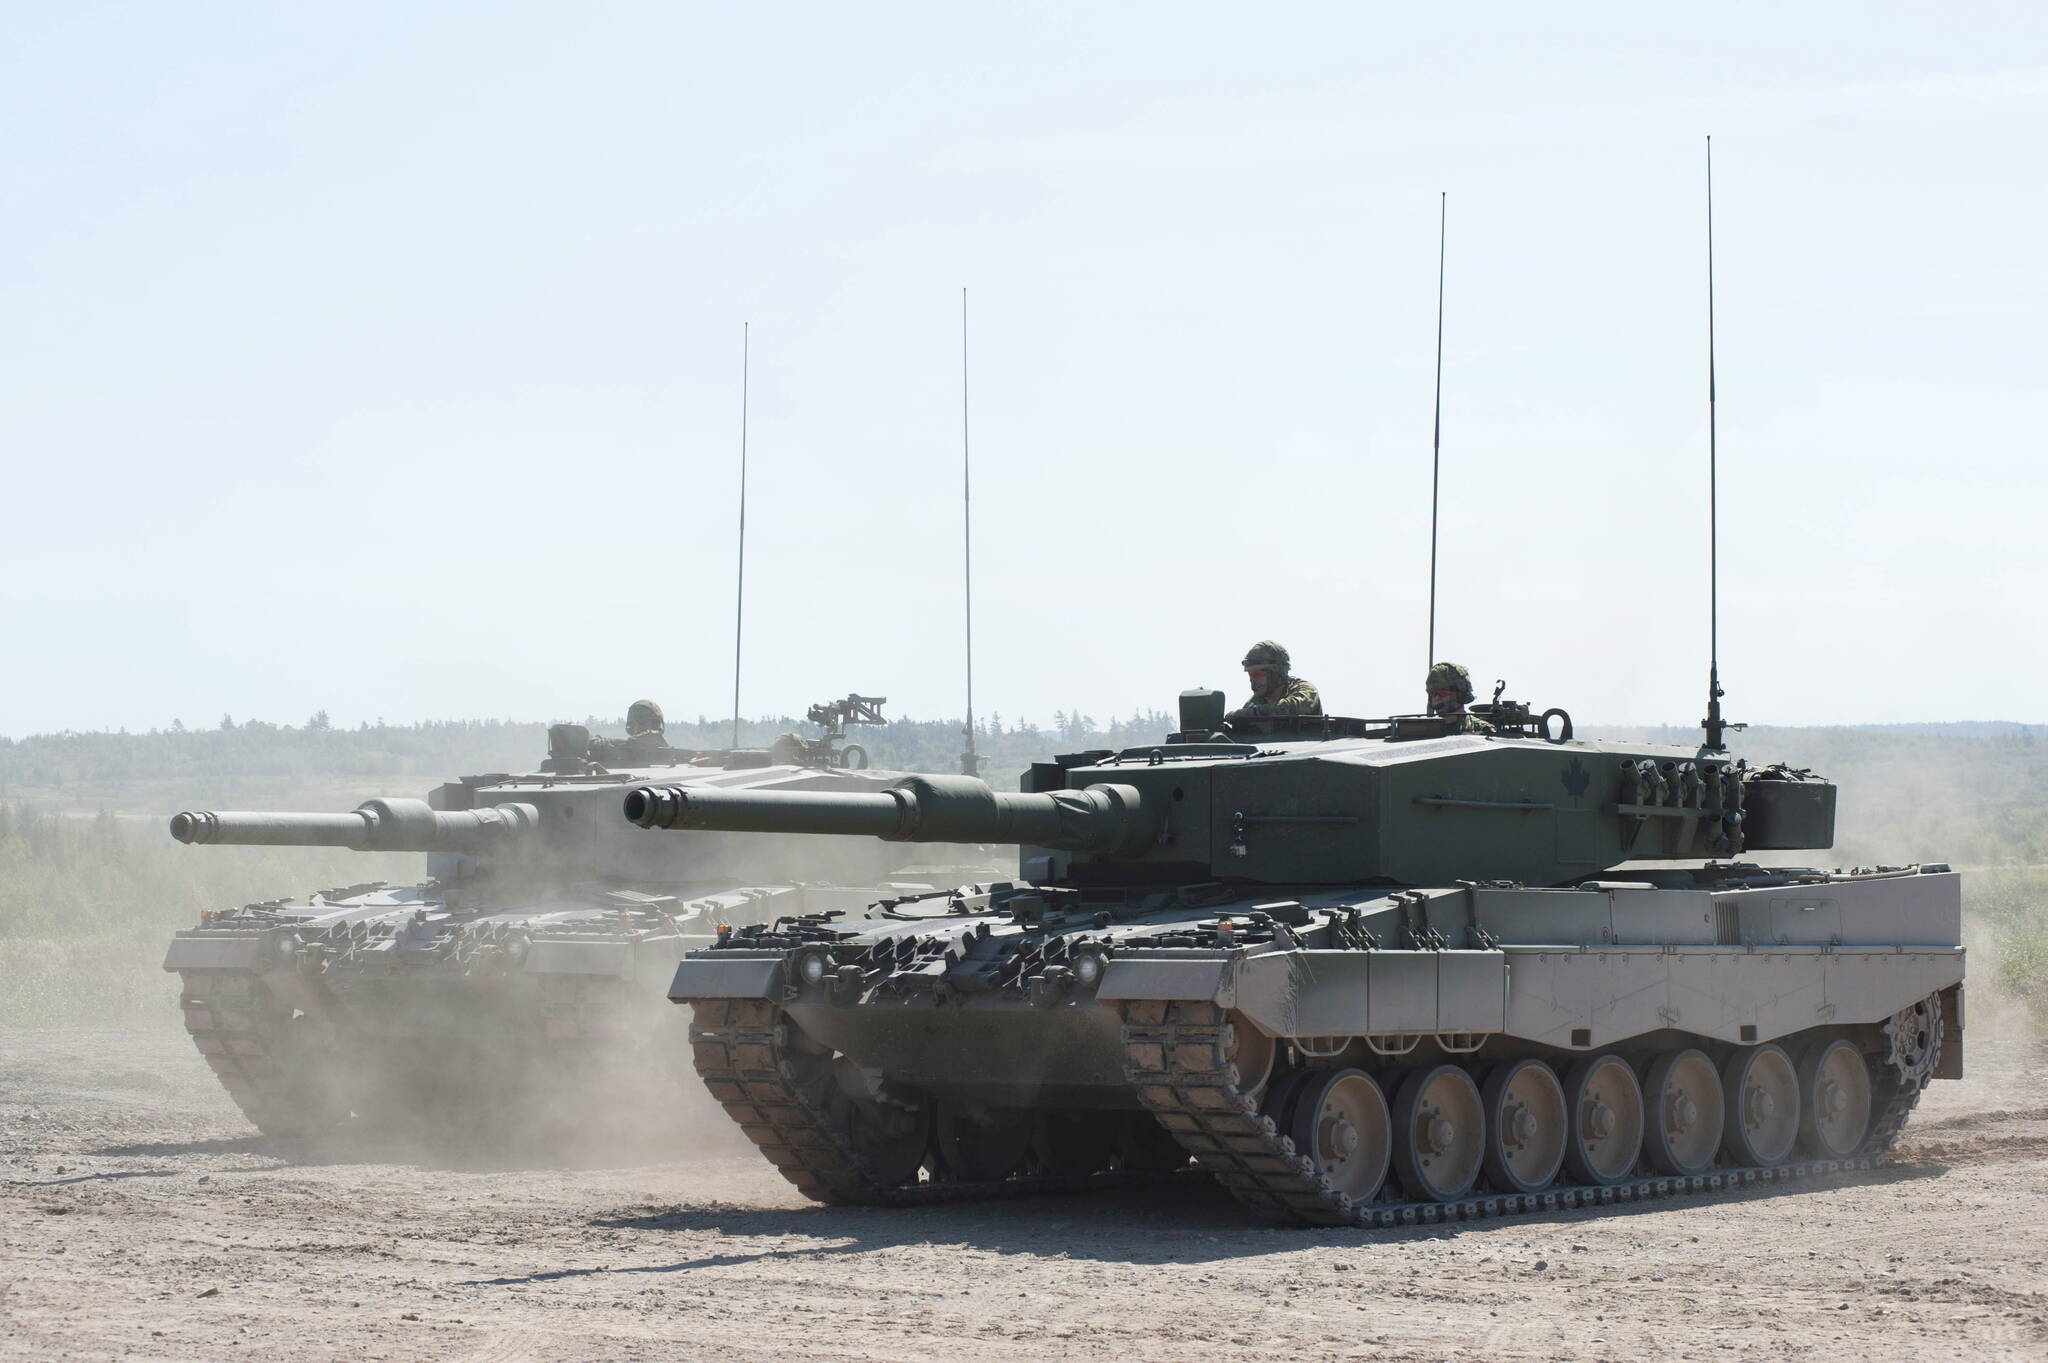 Defence Minister Anita Anand says Canada is sending four of its Leopard 2 battle tanks to Ukraine. A Canadian Forces Leopard 2A4 tank displays it’s firepower on the firing range at CFB Gagetown in Oromocto, N.B., on Thursday, September 13, 2012. THE CANADIAN PRESS/David Smith